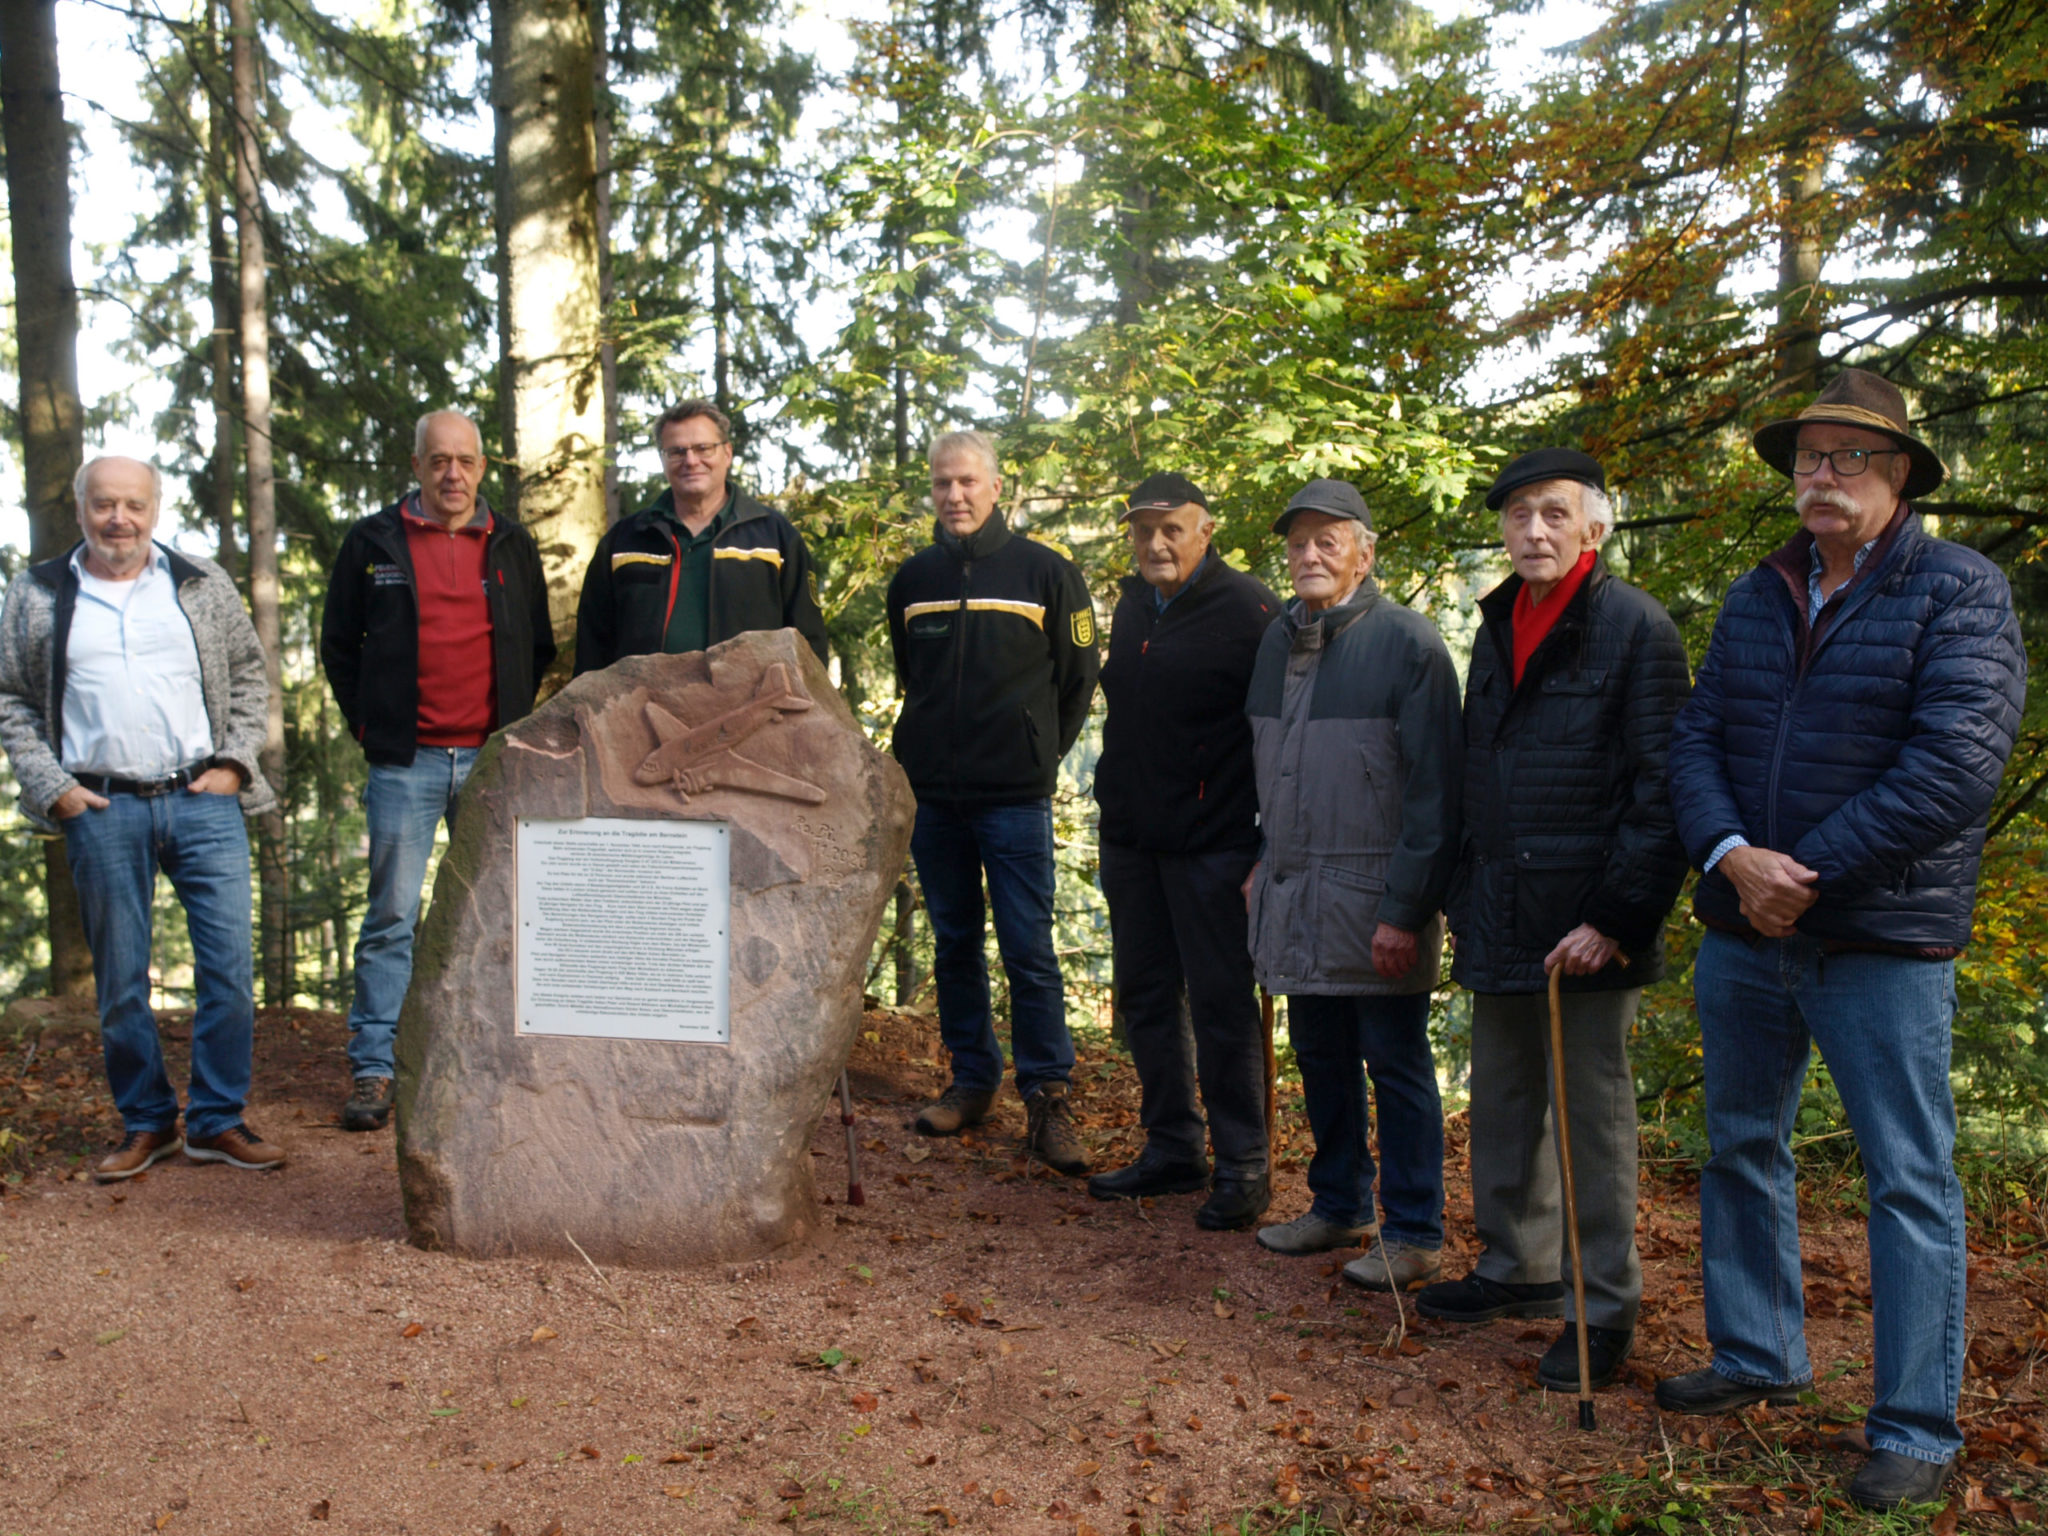 A C-47 Crashed in Germany in 1945—Now Locals Have Erected a Memorial